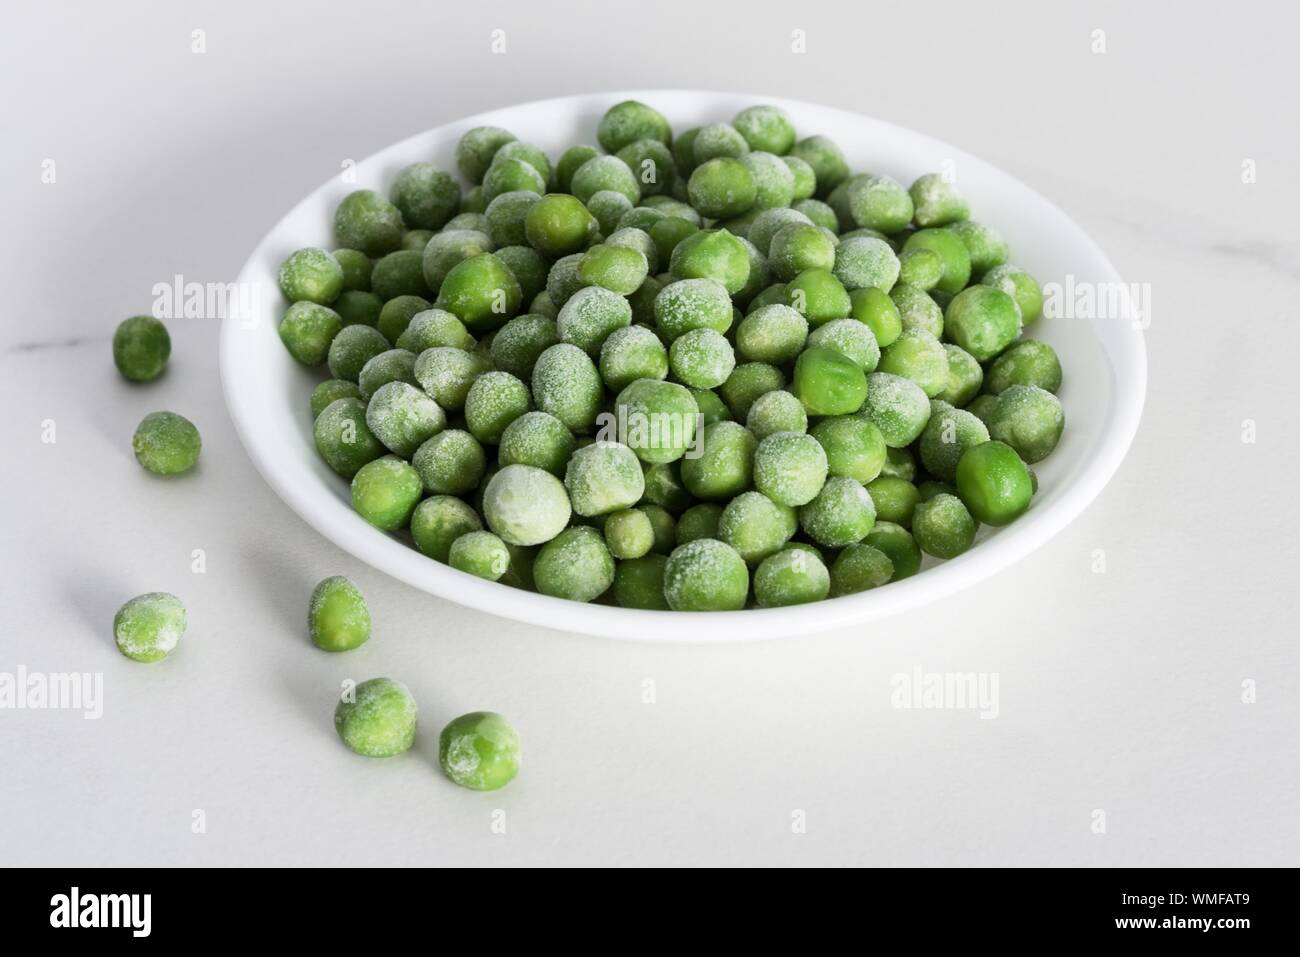 Close-up Of Green Peas In Bowl On White Background Stock Photo